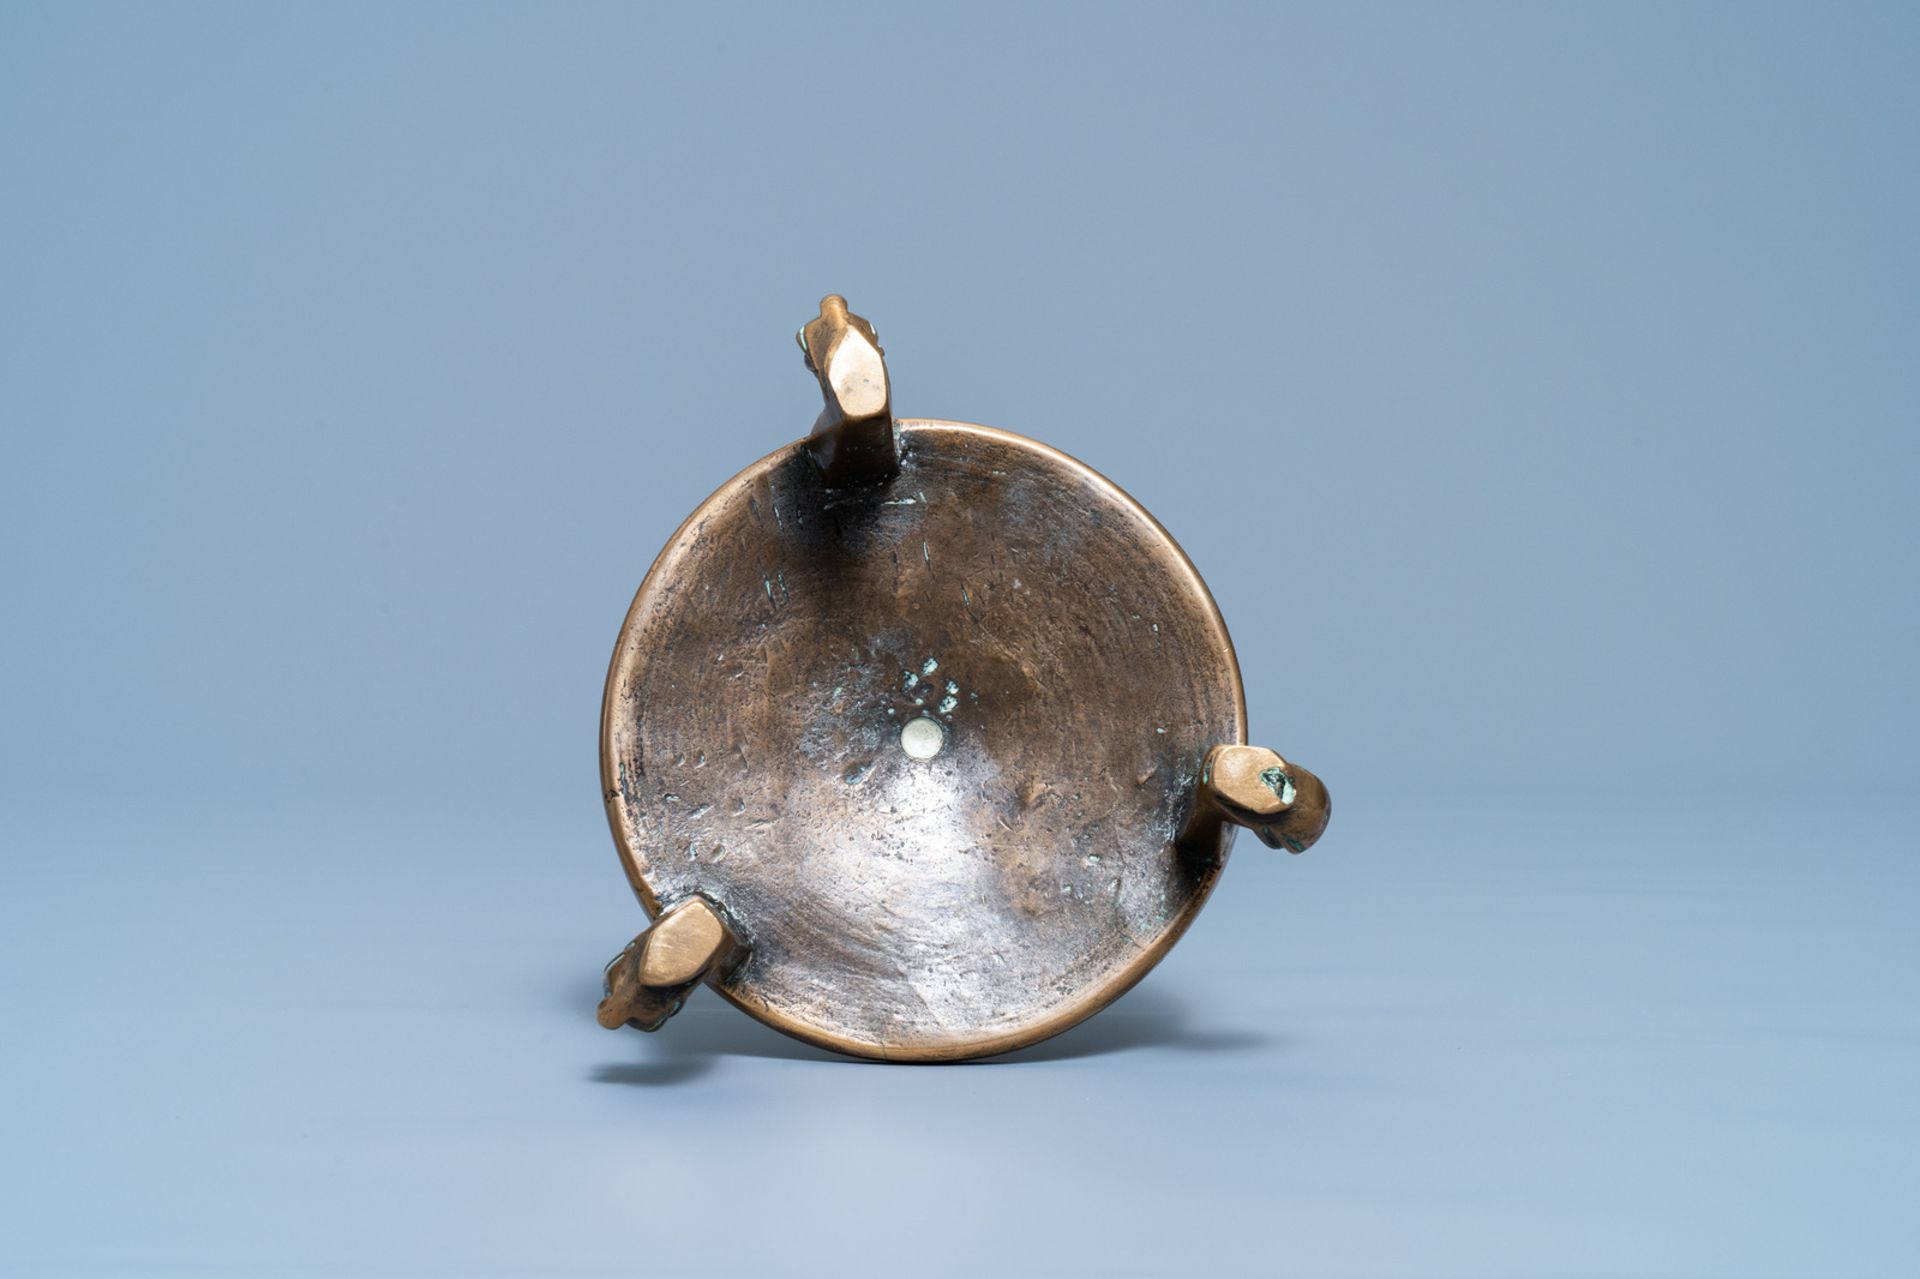 A Flemish or Dutch bronze candlestick, 14/15th C. - Image 7 of 7